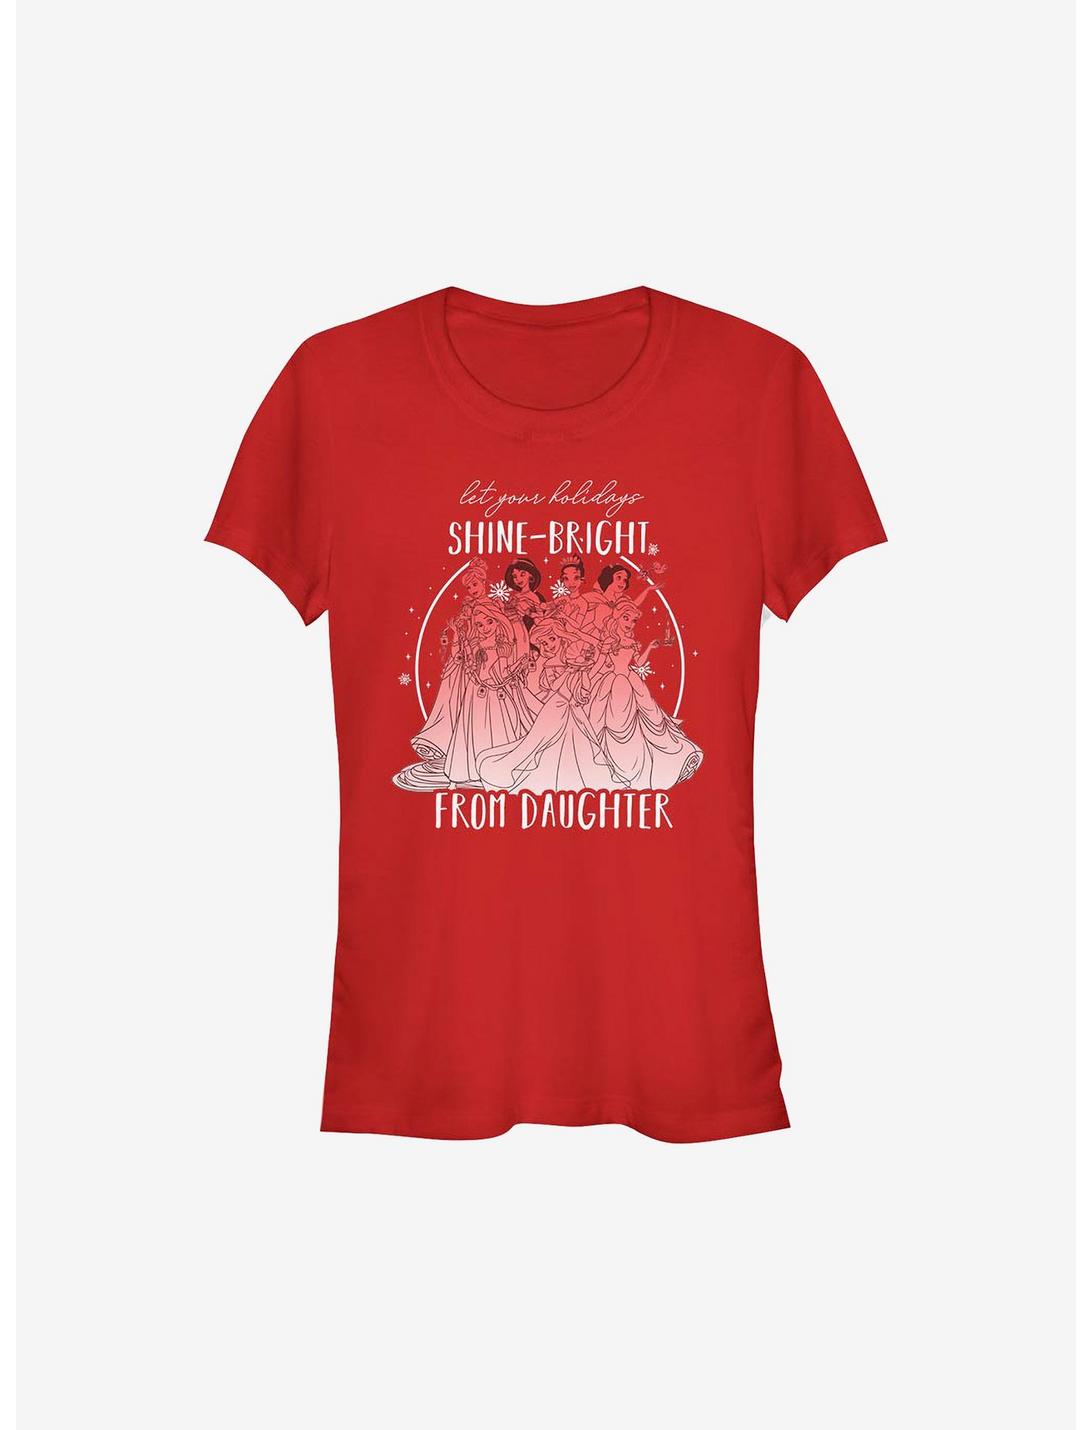 Disney Princesses Shine Bright From Daughter Girls T-Shirt, RED, hi-res